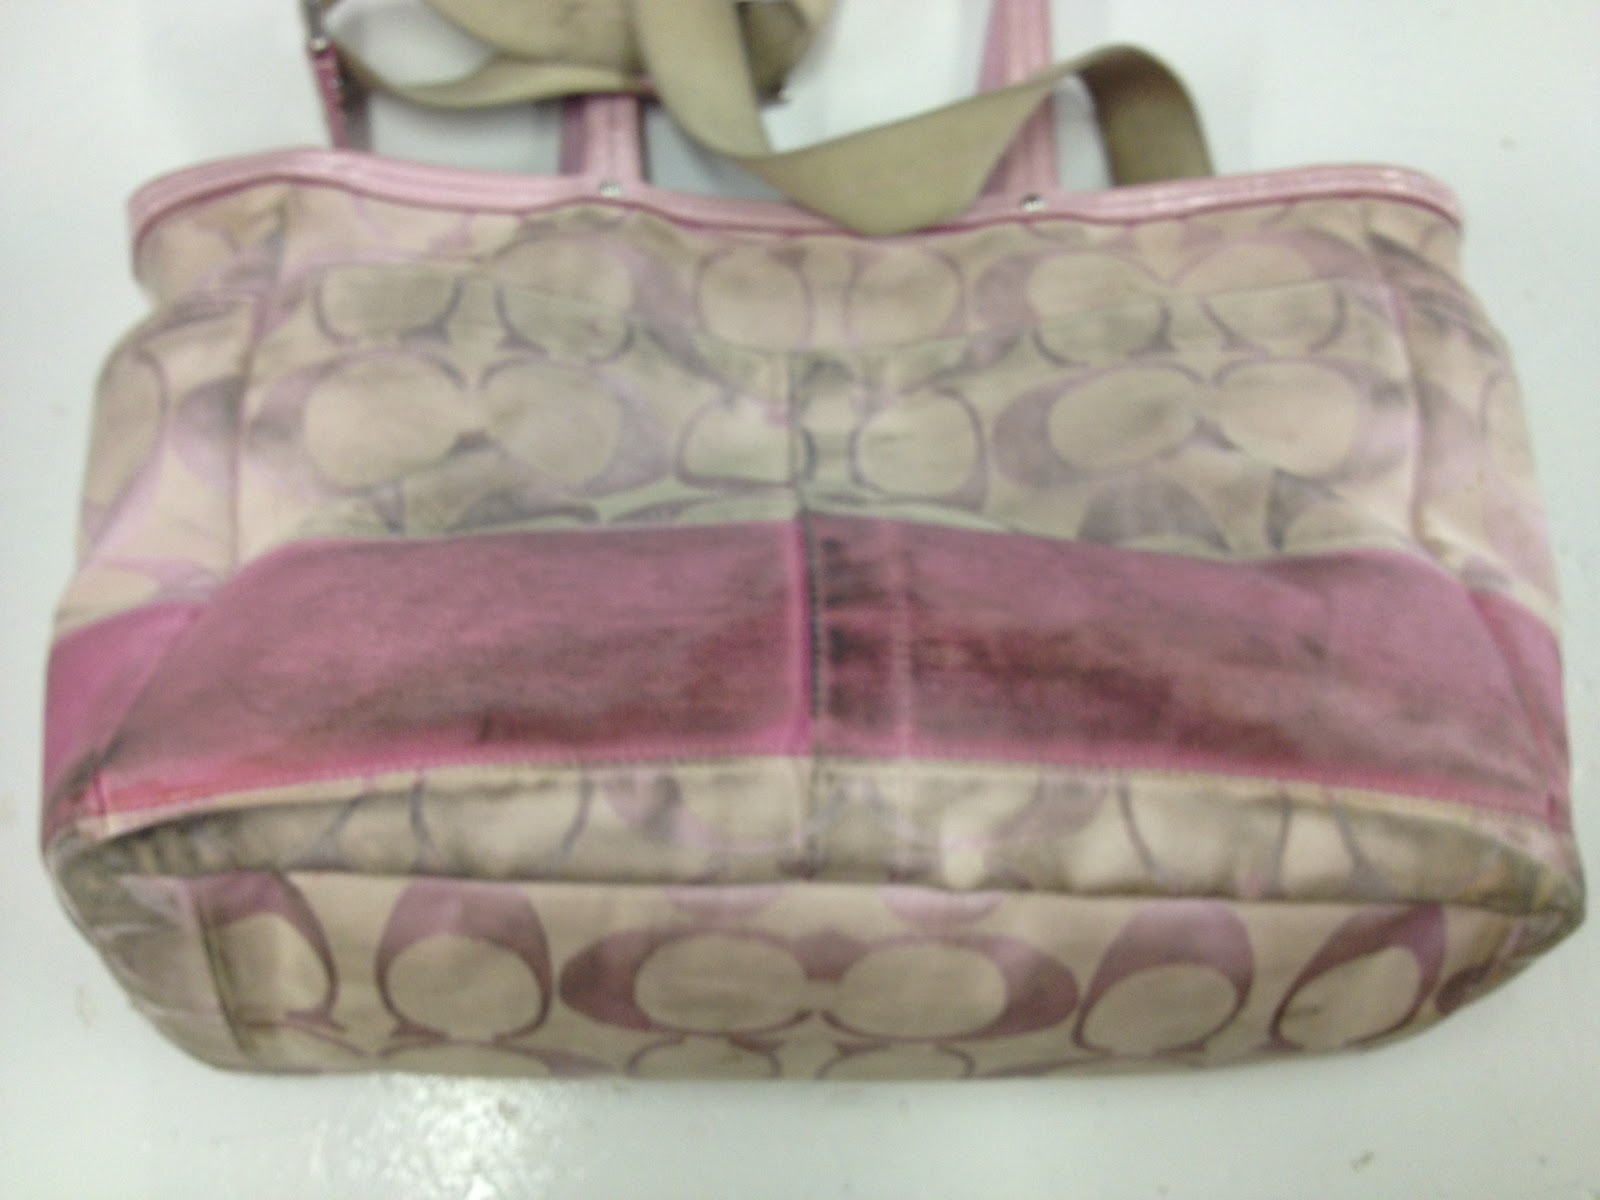 Leather Cleaning, Re-dyeing and Restoration: Coach Purse Cleaned and Restored